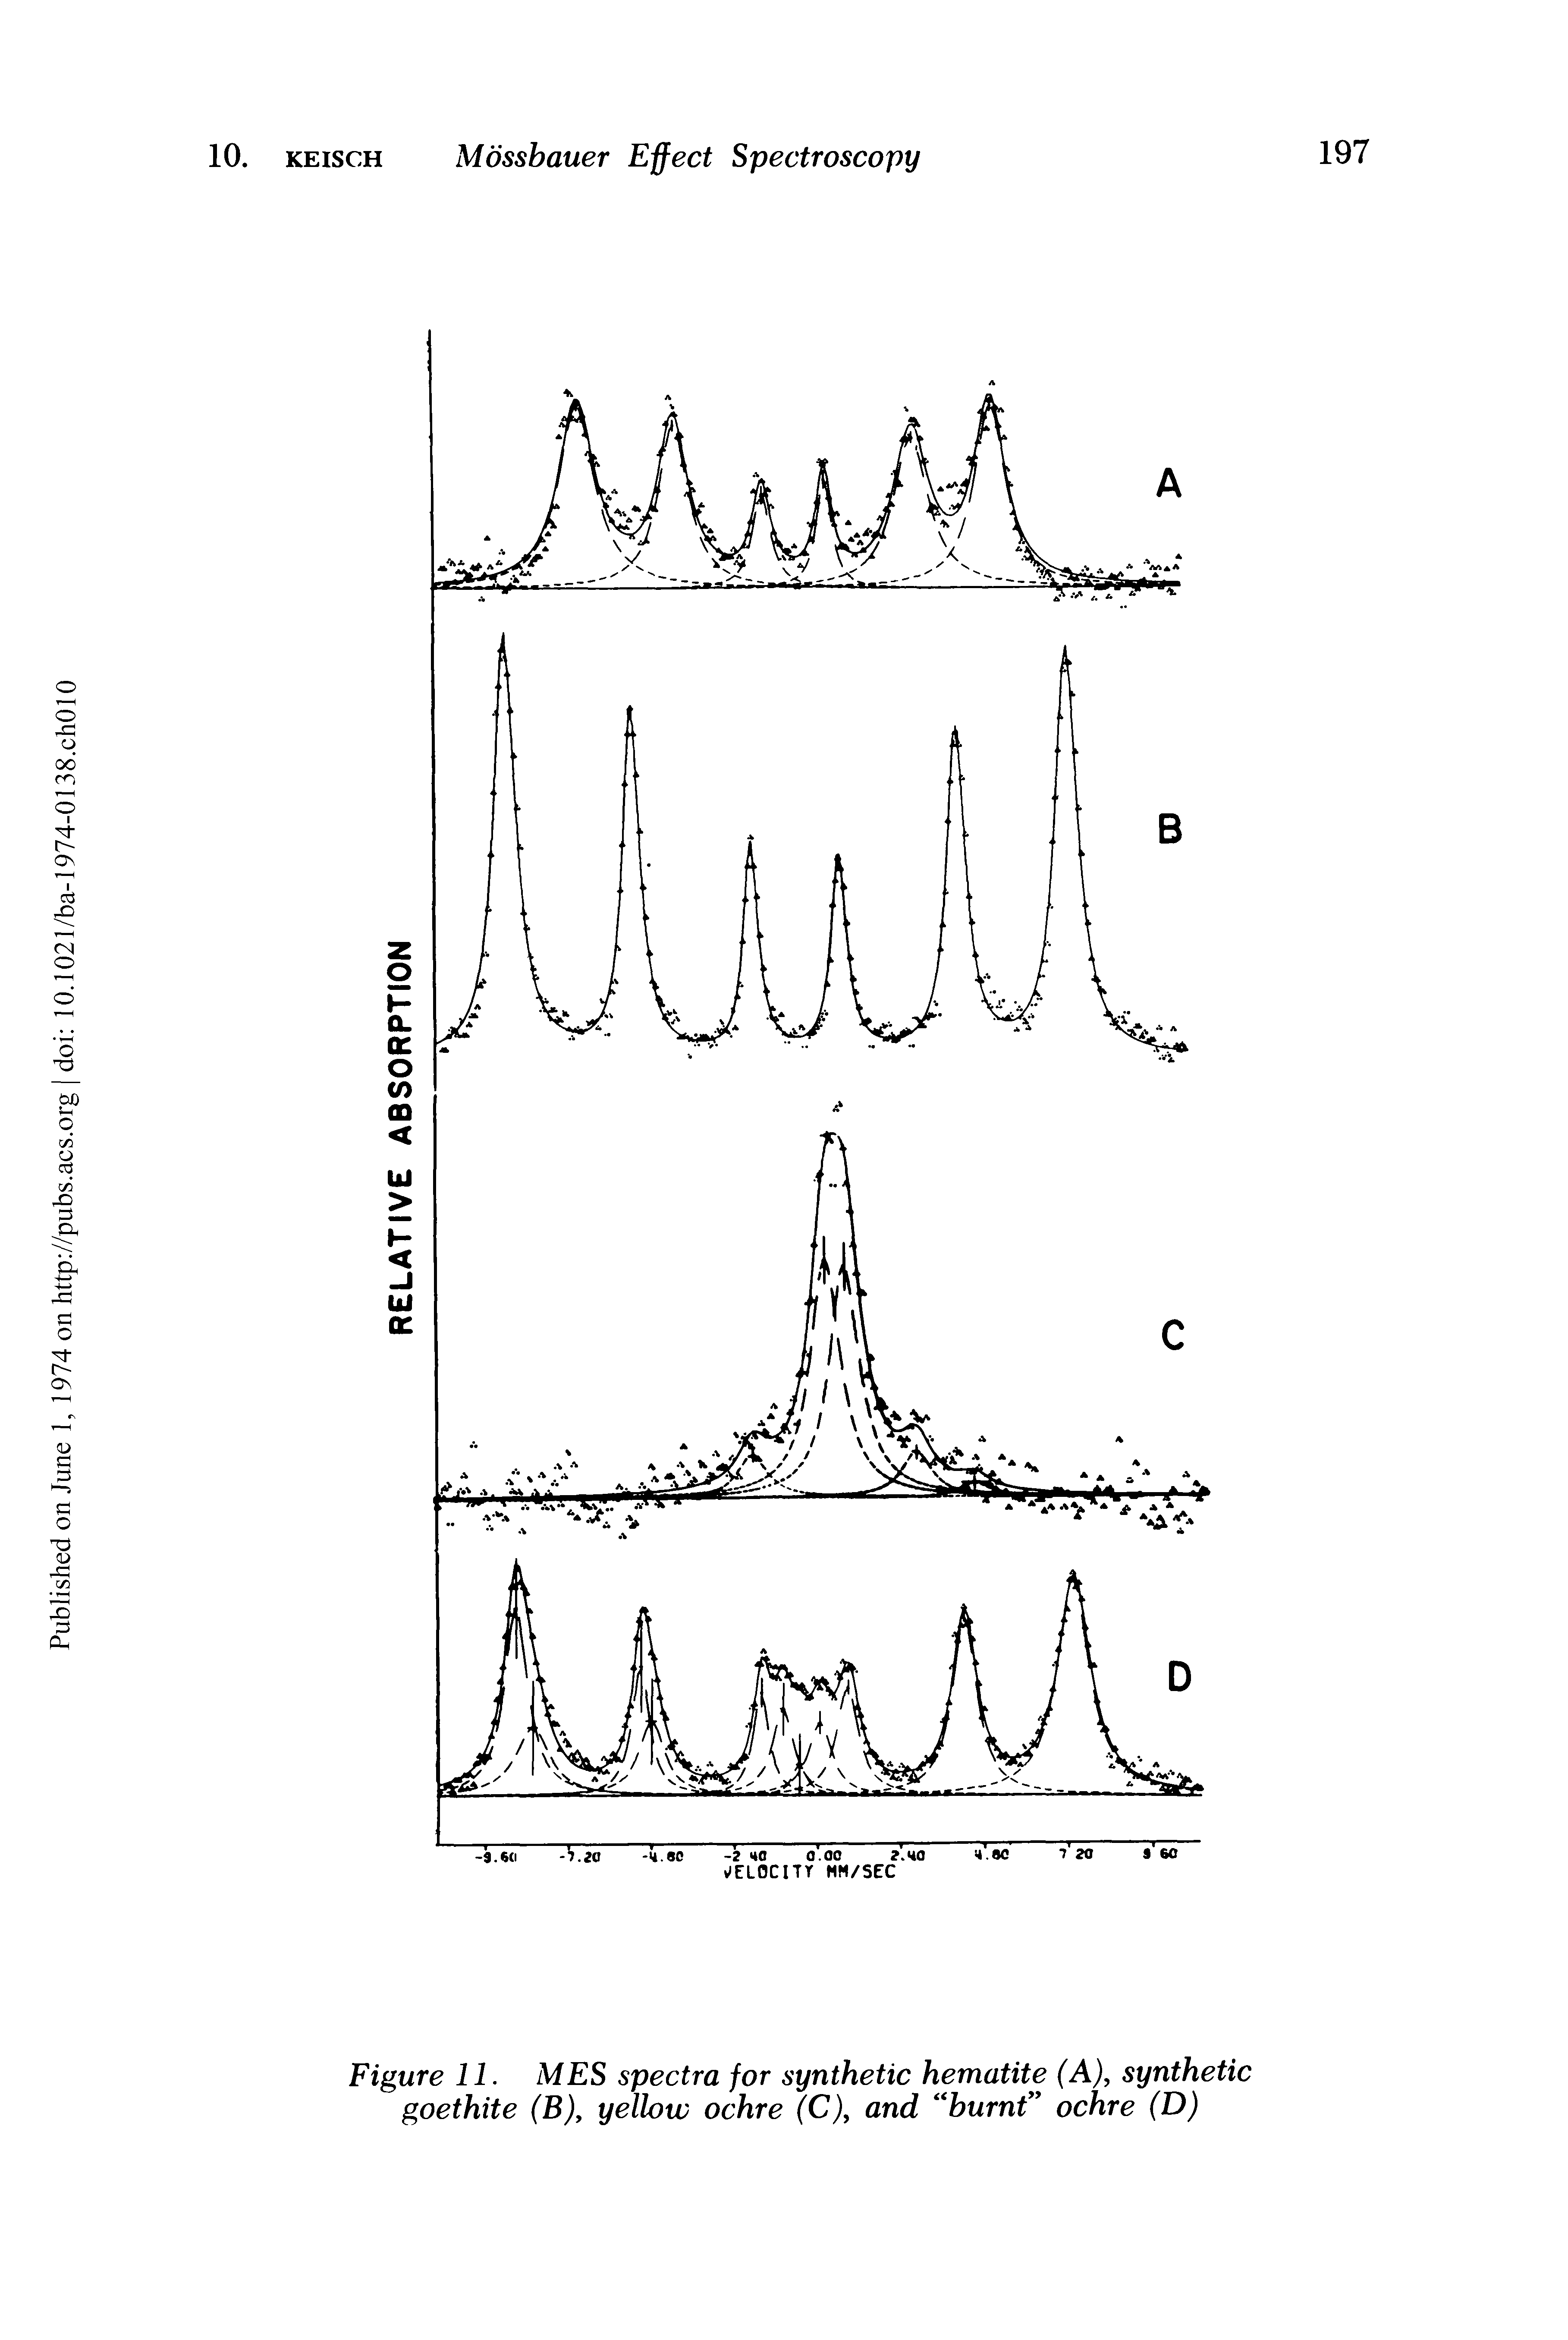 Figure 11. MES spectra for synthetic hematite (A), synthetic goethite (B), yellow ochre (C), and burnt ochre (D)...